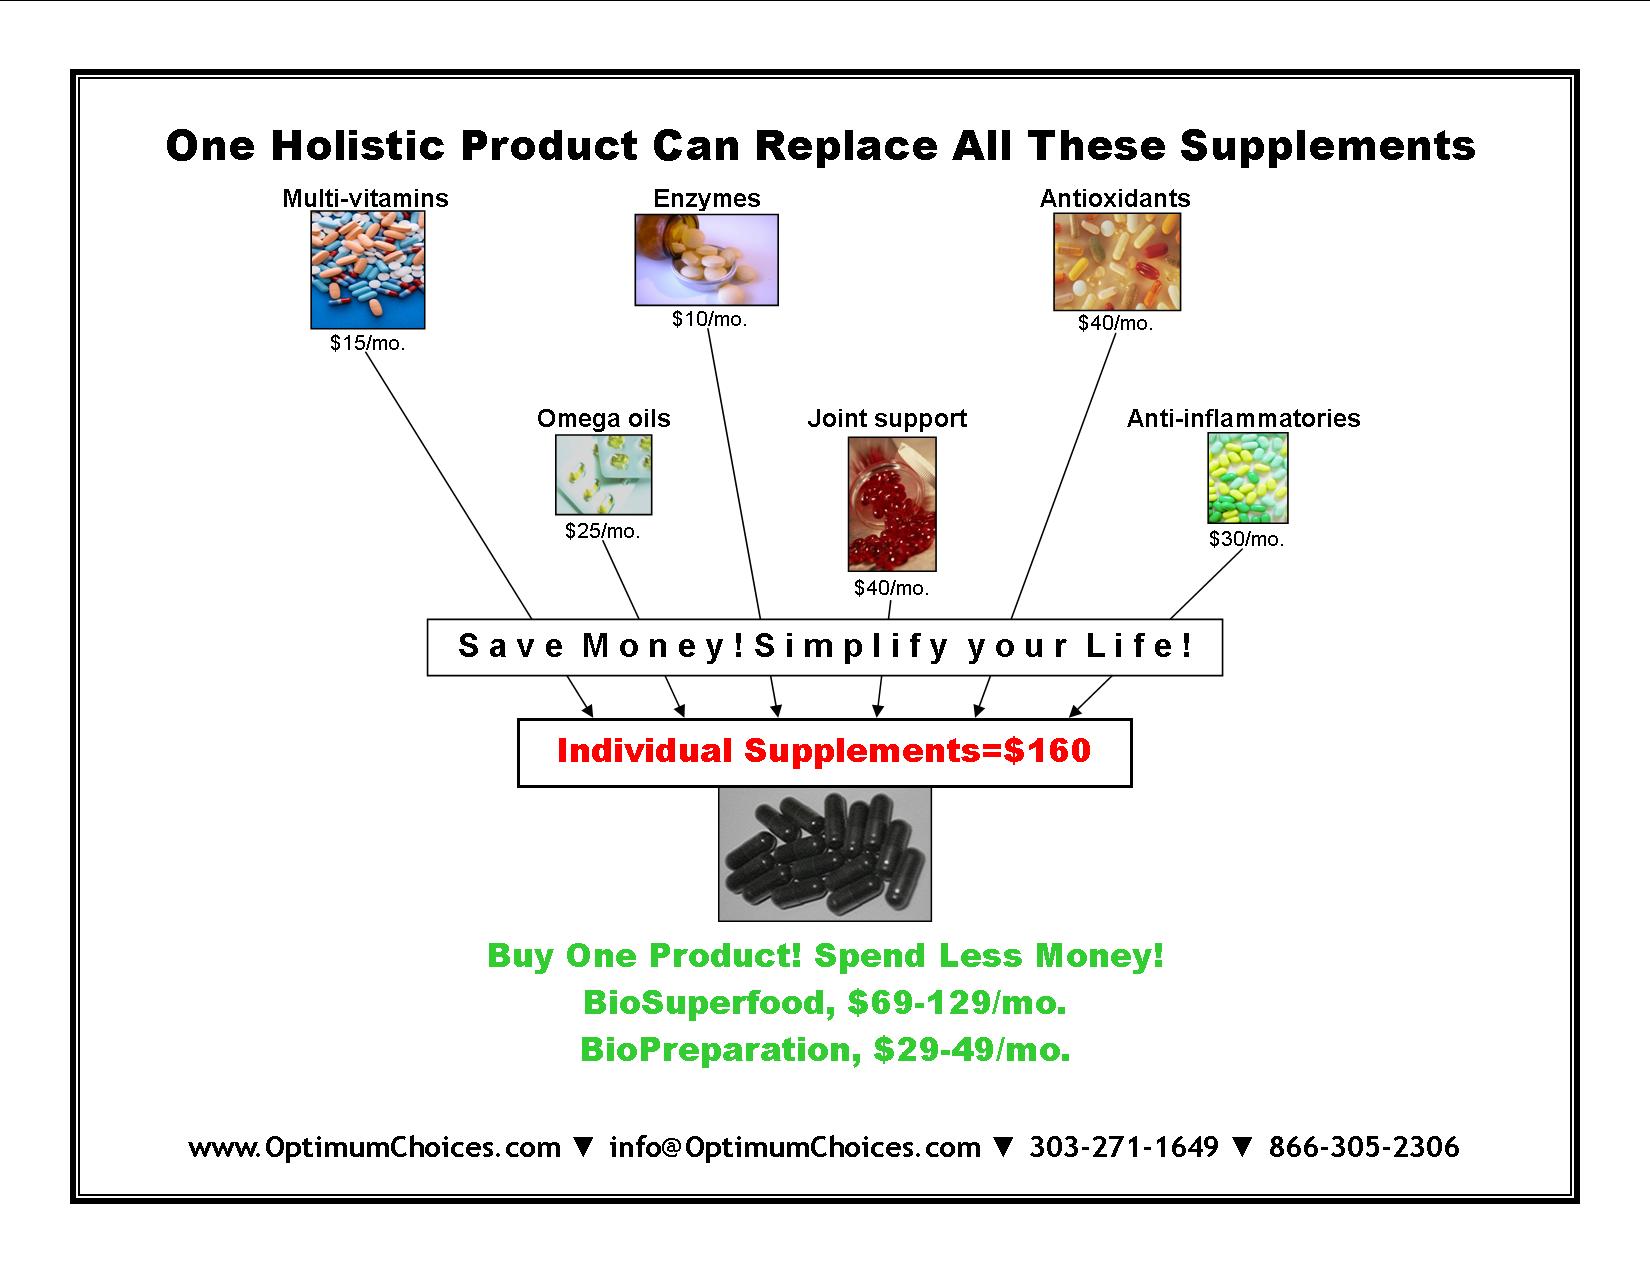 Save money buying supplements